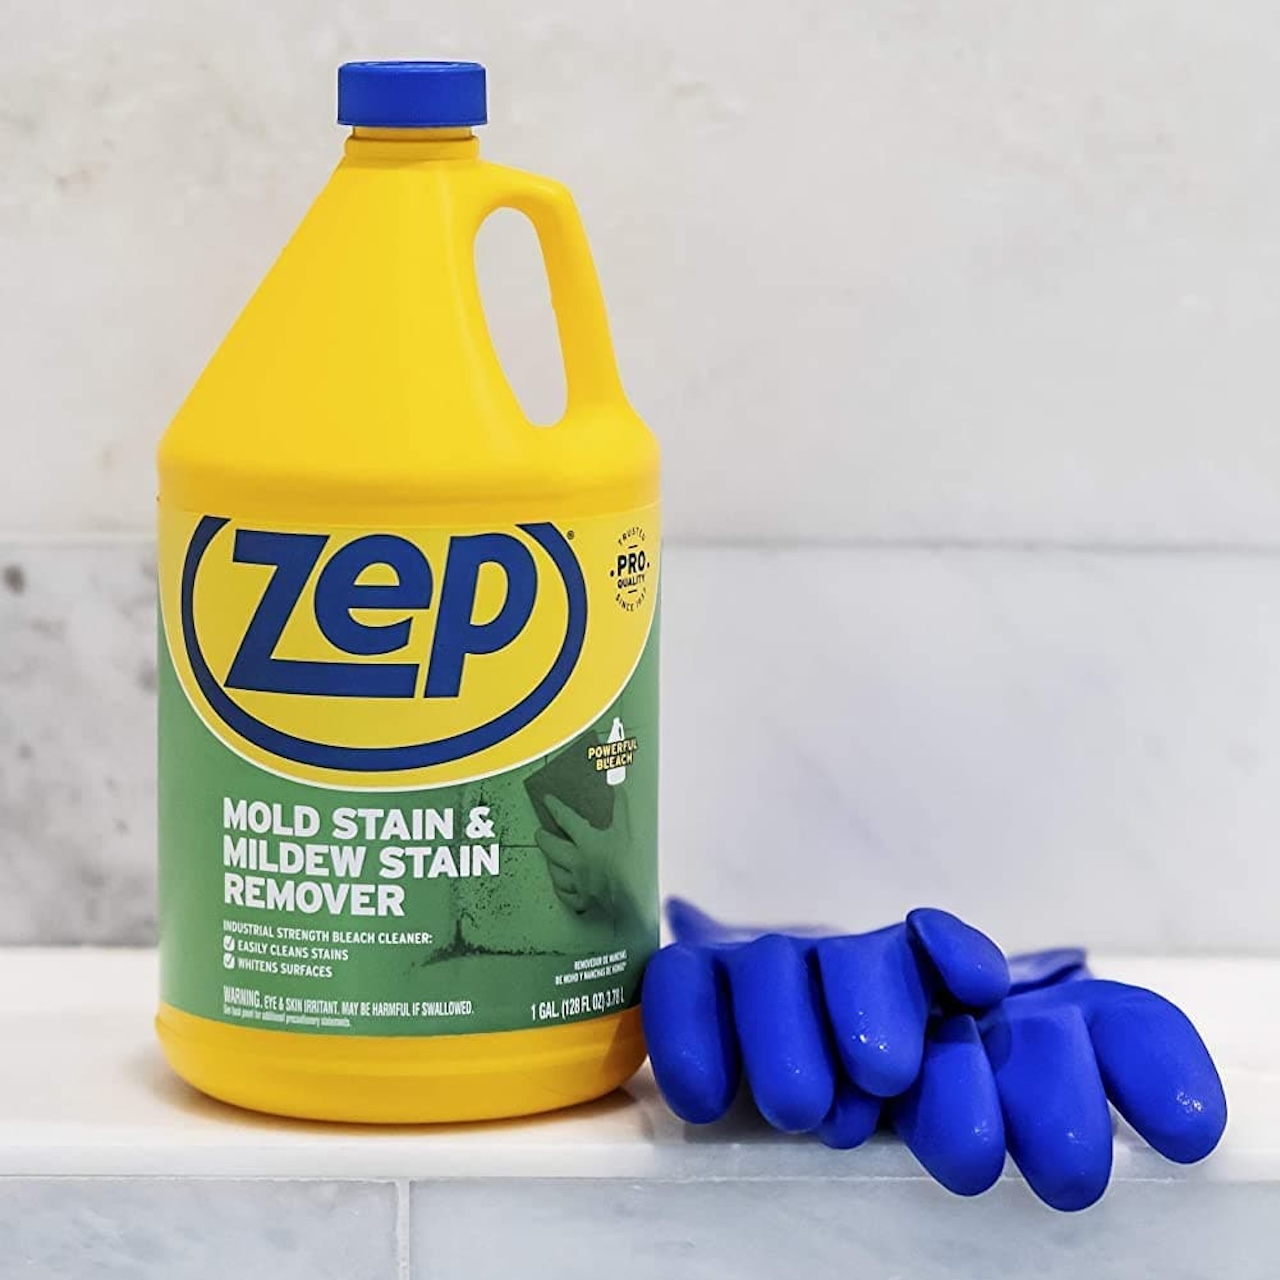 How To Use Zep Toilet Bowl Cleaner